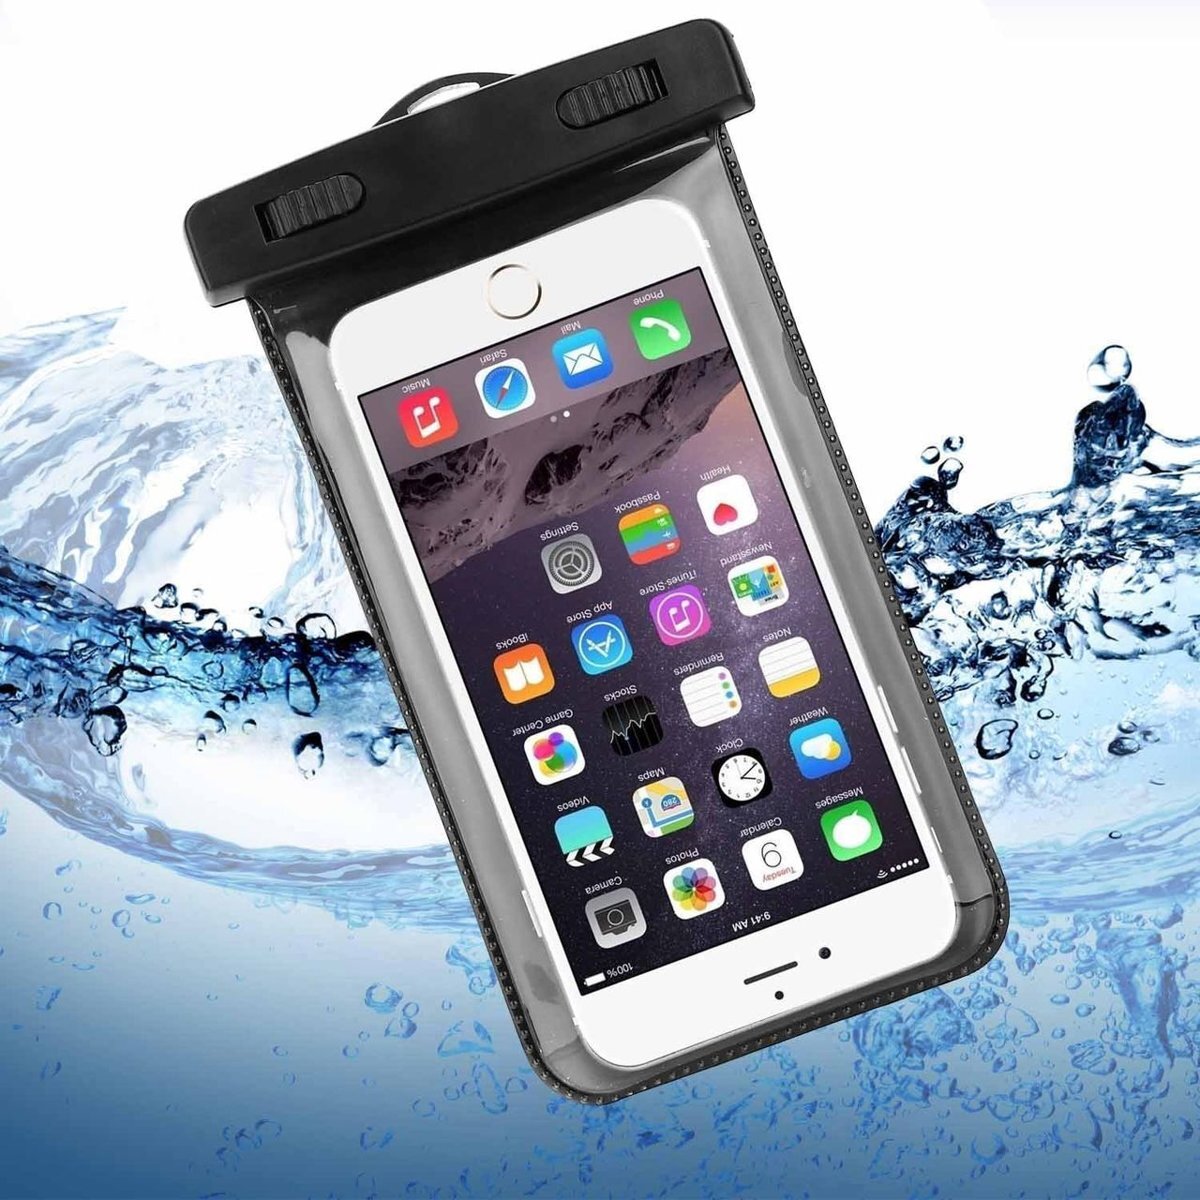 - Universal Waterproof Phone Pouch cae cover voor iPhone 5 5S 5C 6 6S 6 6S Plus Samsung Galaxy S6 S6 Edge Note 3 Note 4 S5 S4 S3 S4 Mini S5 Mini Universal Waterproof Phone Pouch cae cover voor iPhone 5 5S 5C 6 6 Plus Samsung Galaxy S6 S6 Edge Note 3 Note 4 